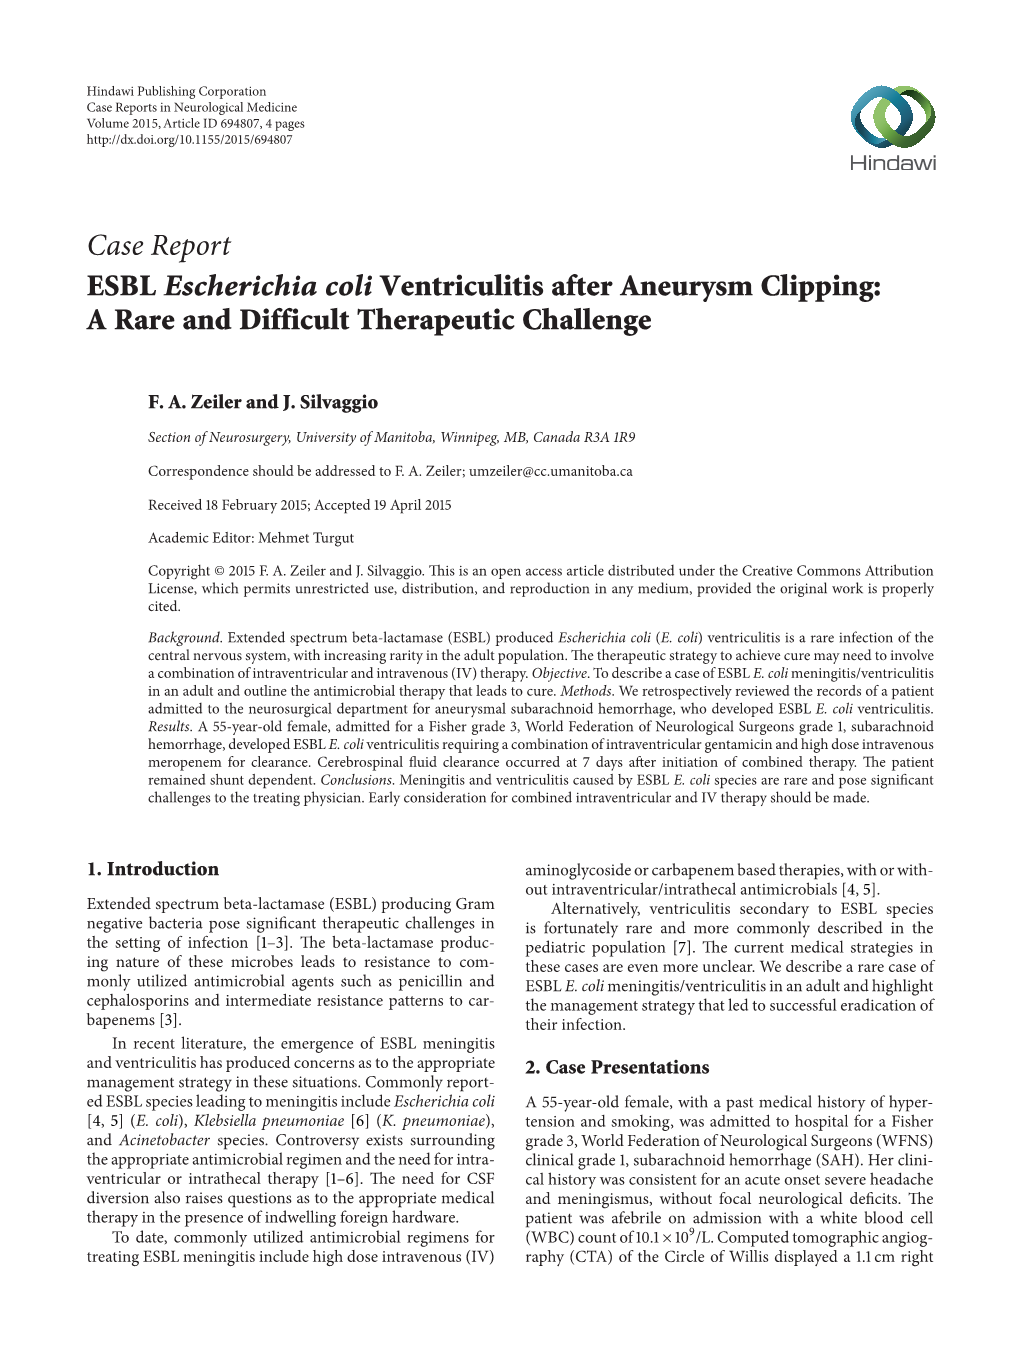 Case Report ESBL Escherichia Coli Ventriculitis After Aneurysm Clipping: a Rare and Difficult Therapeutic Challenge